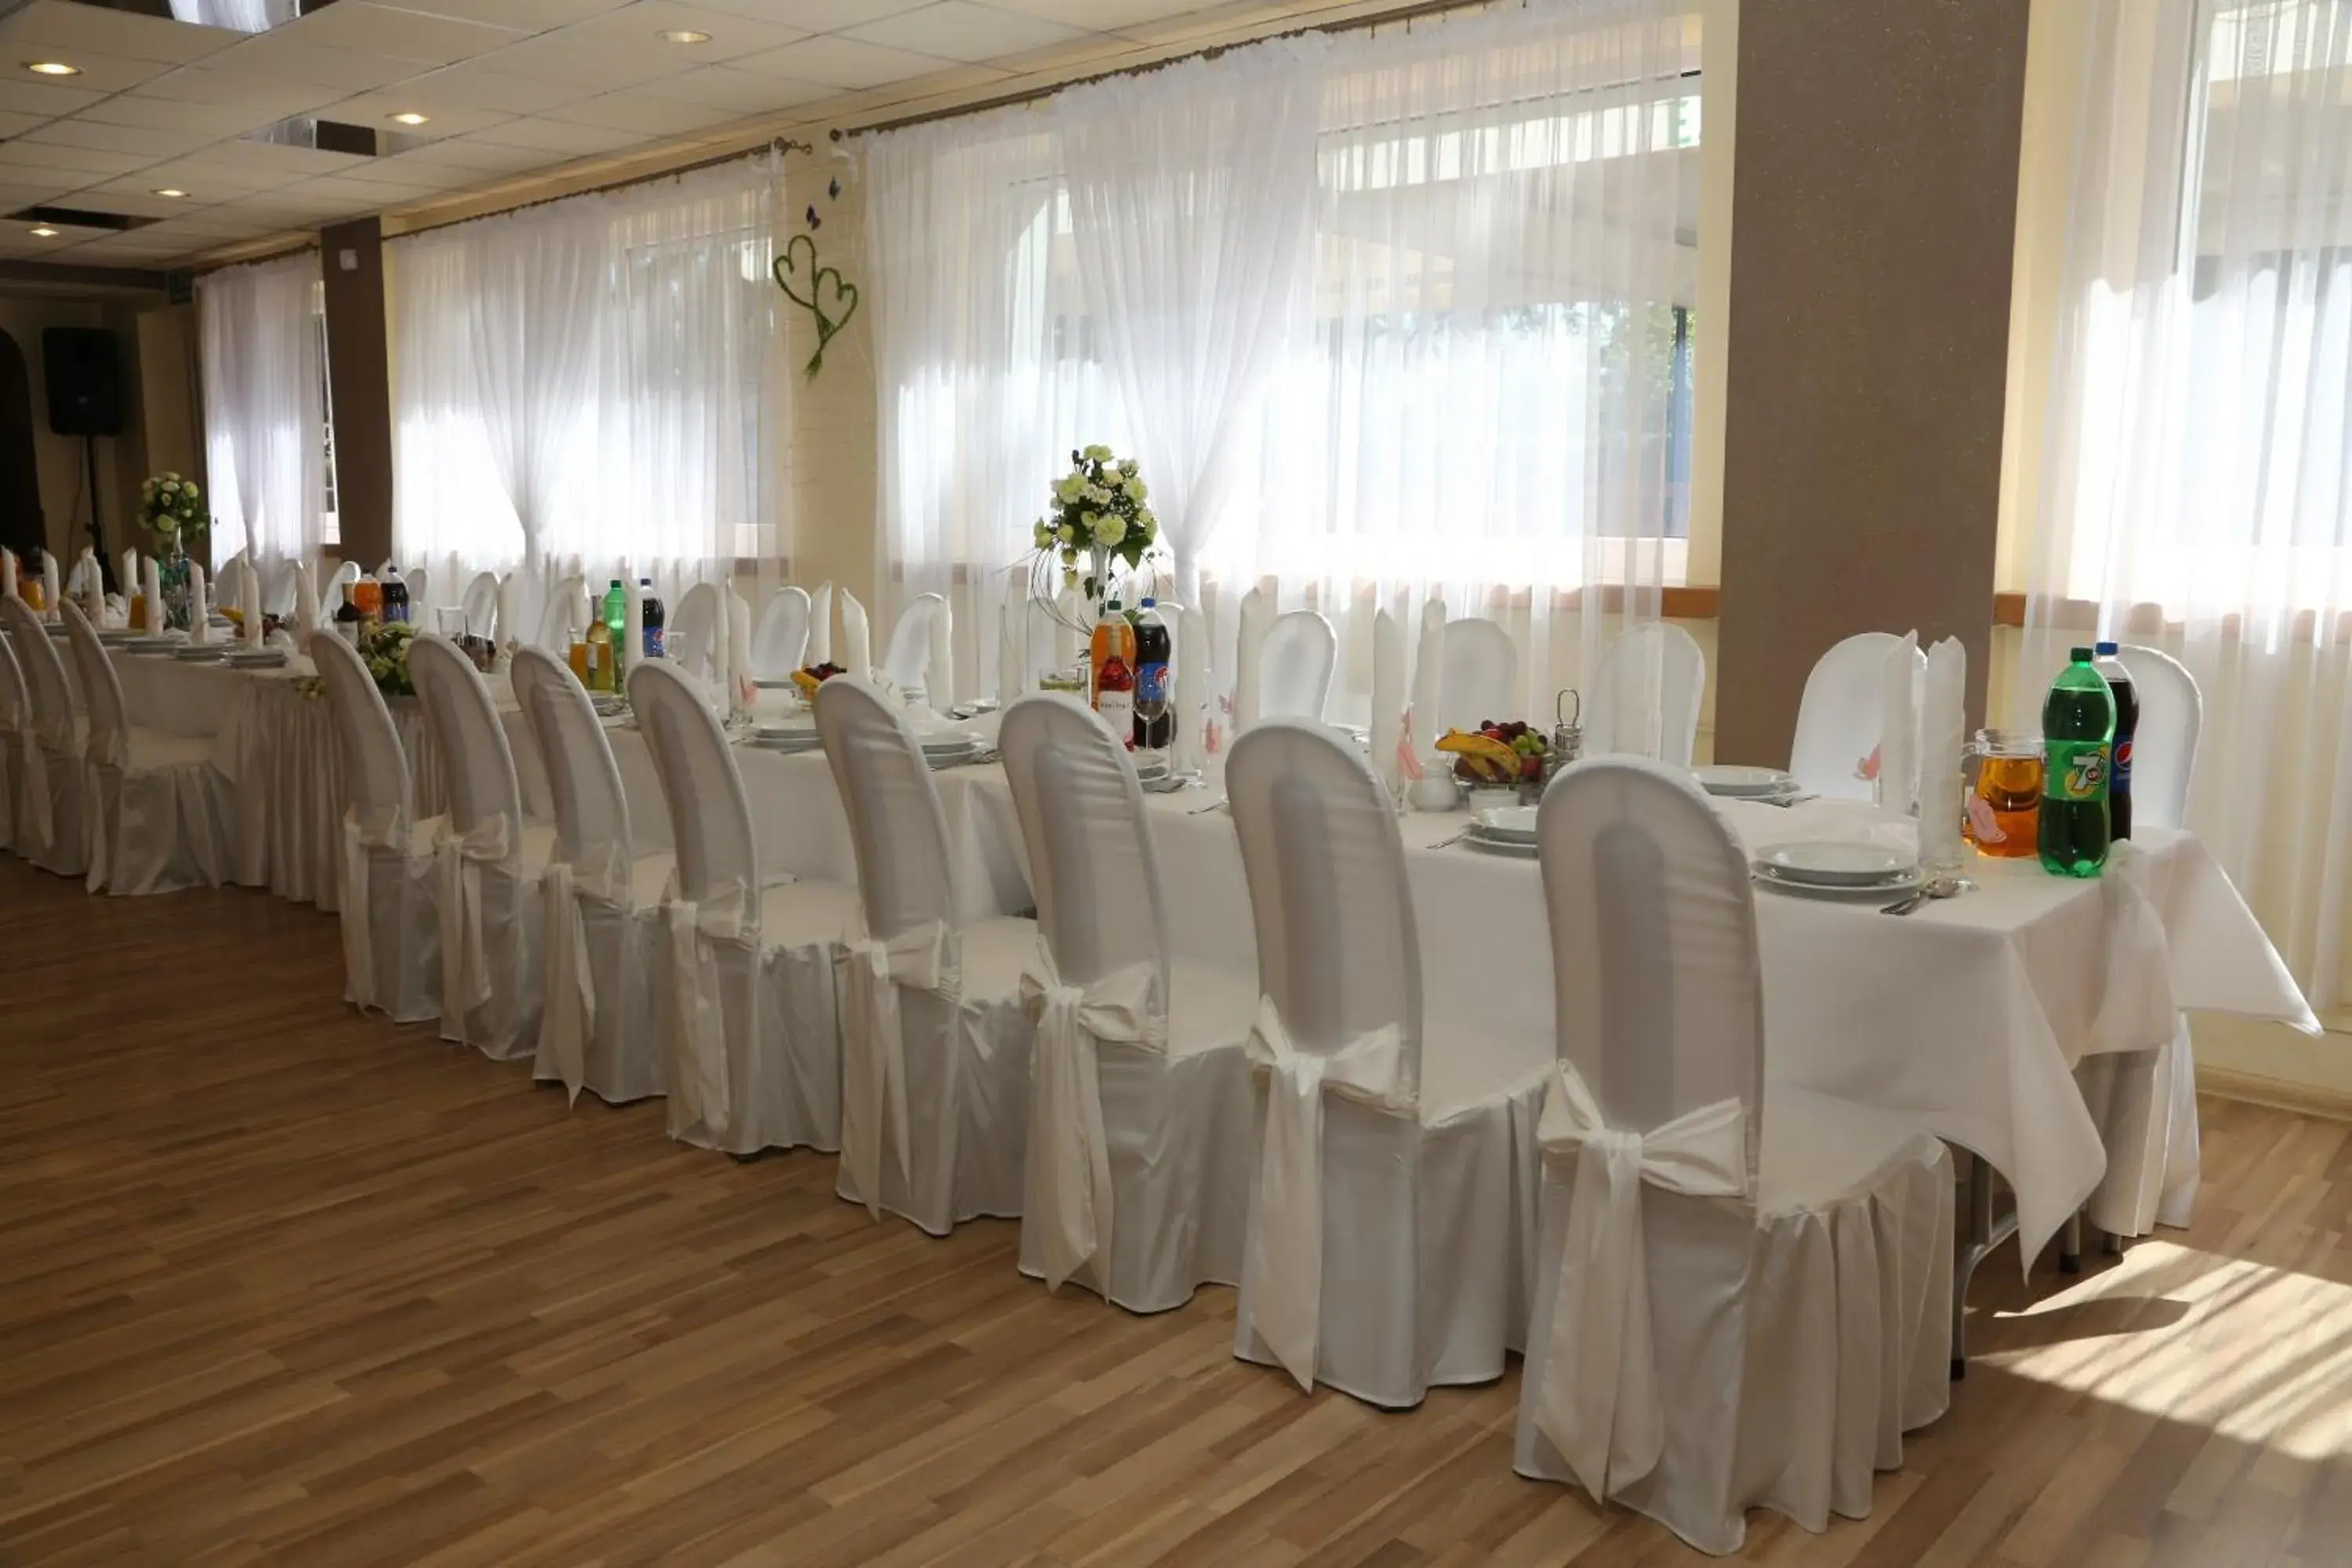 Day, Banquet Facilities in E.T. Hotel